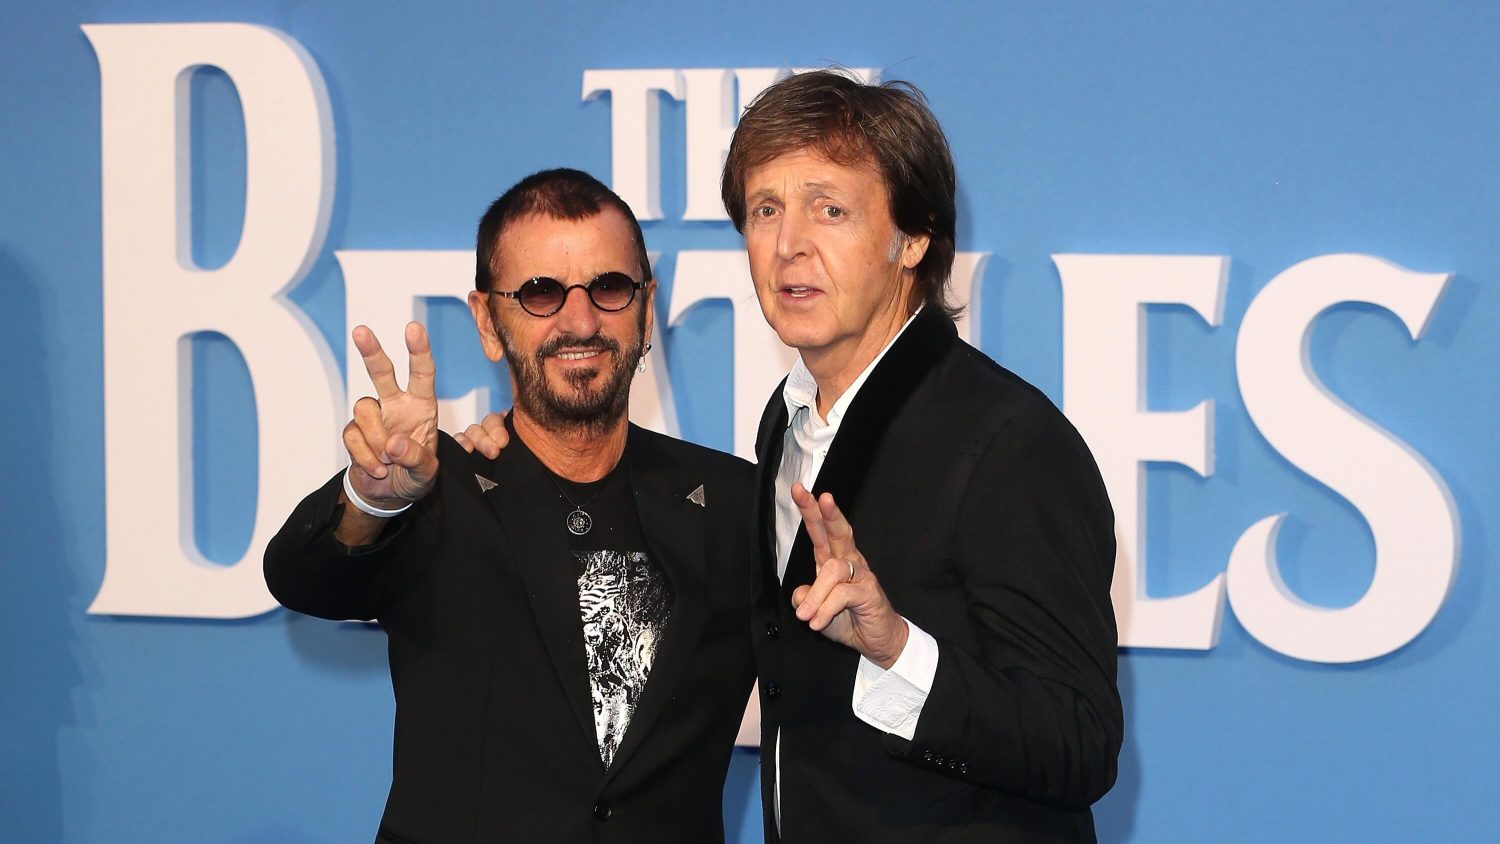 80-Year-Old Ringo Starr Says Broccoli and Blueberries Keep Him